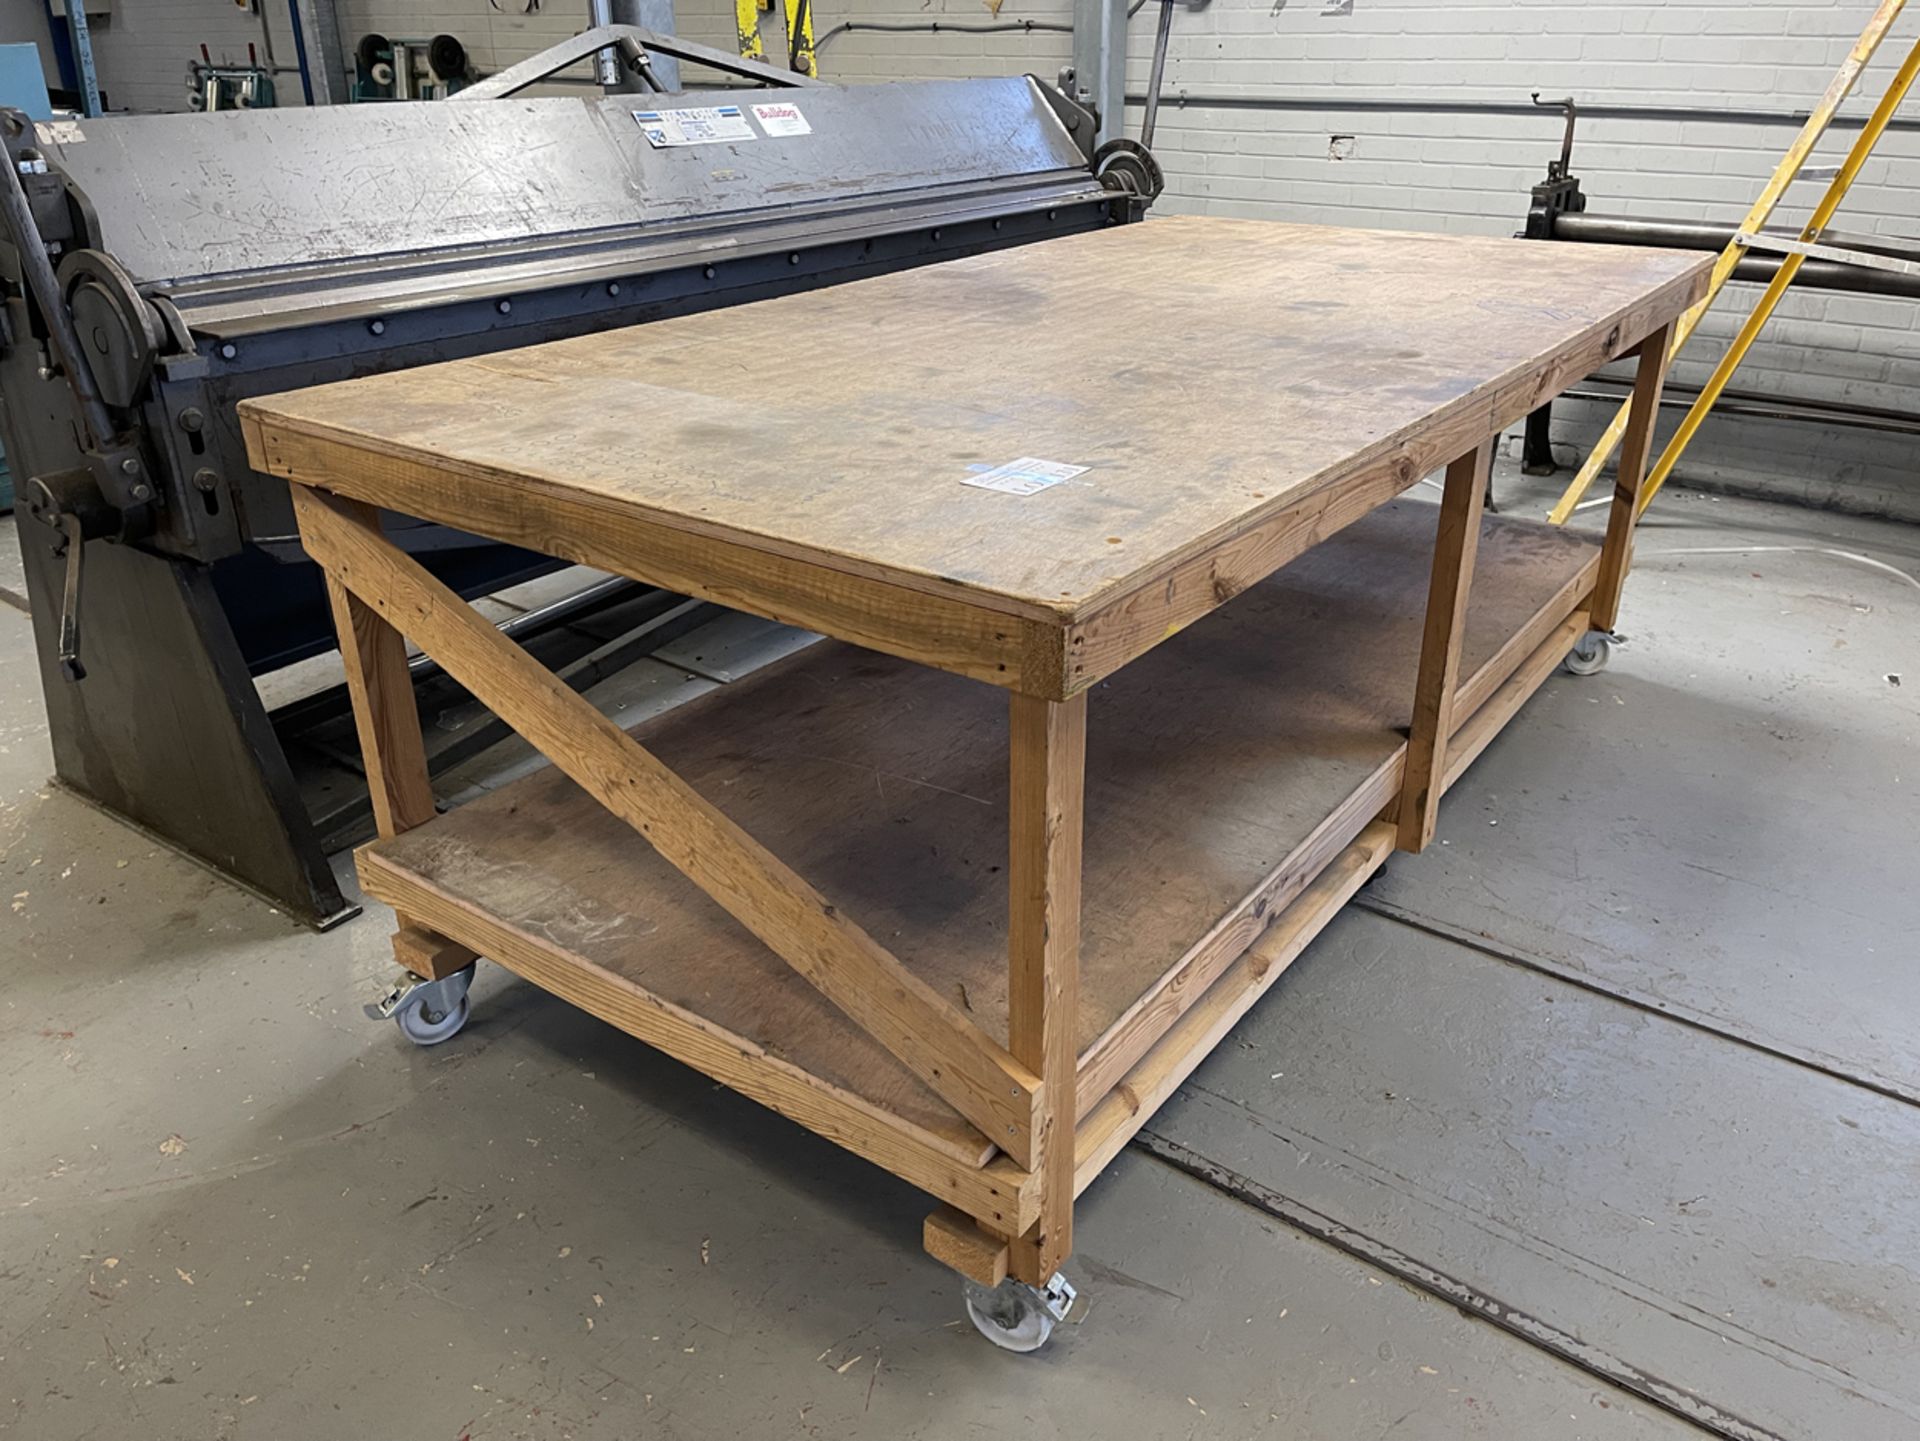 Mobile Wooden Work Bench. 4' x 8' x 37" High. - Image 3 of 3